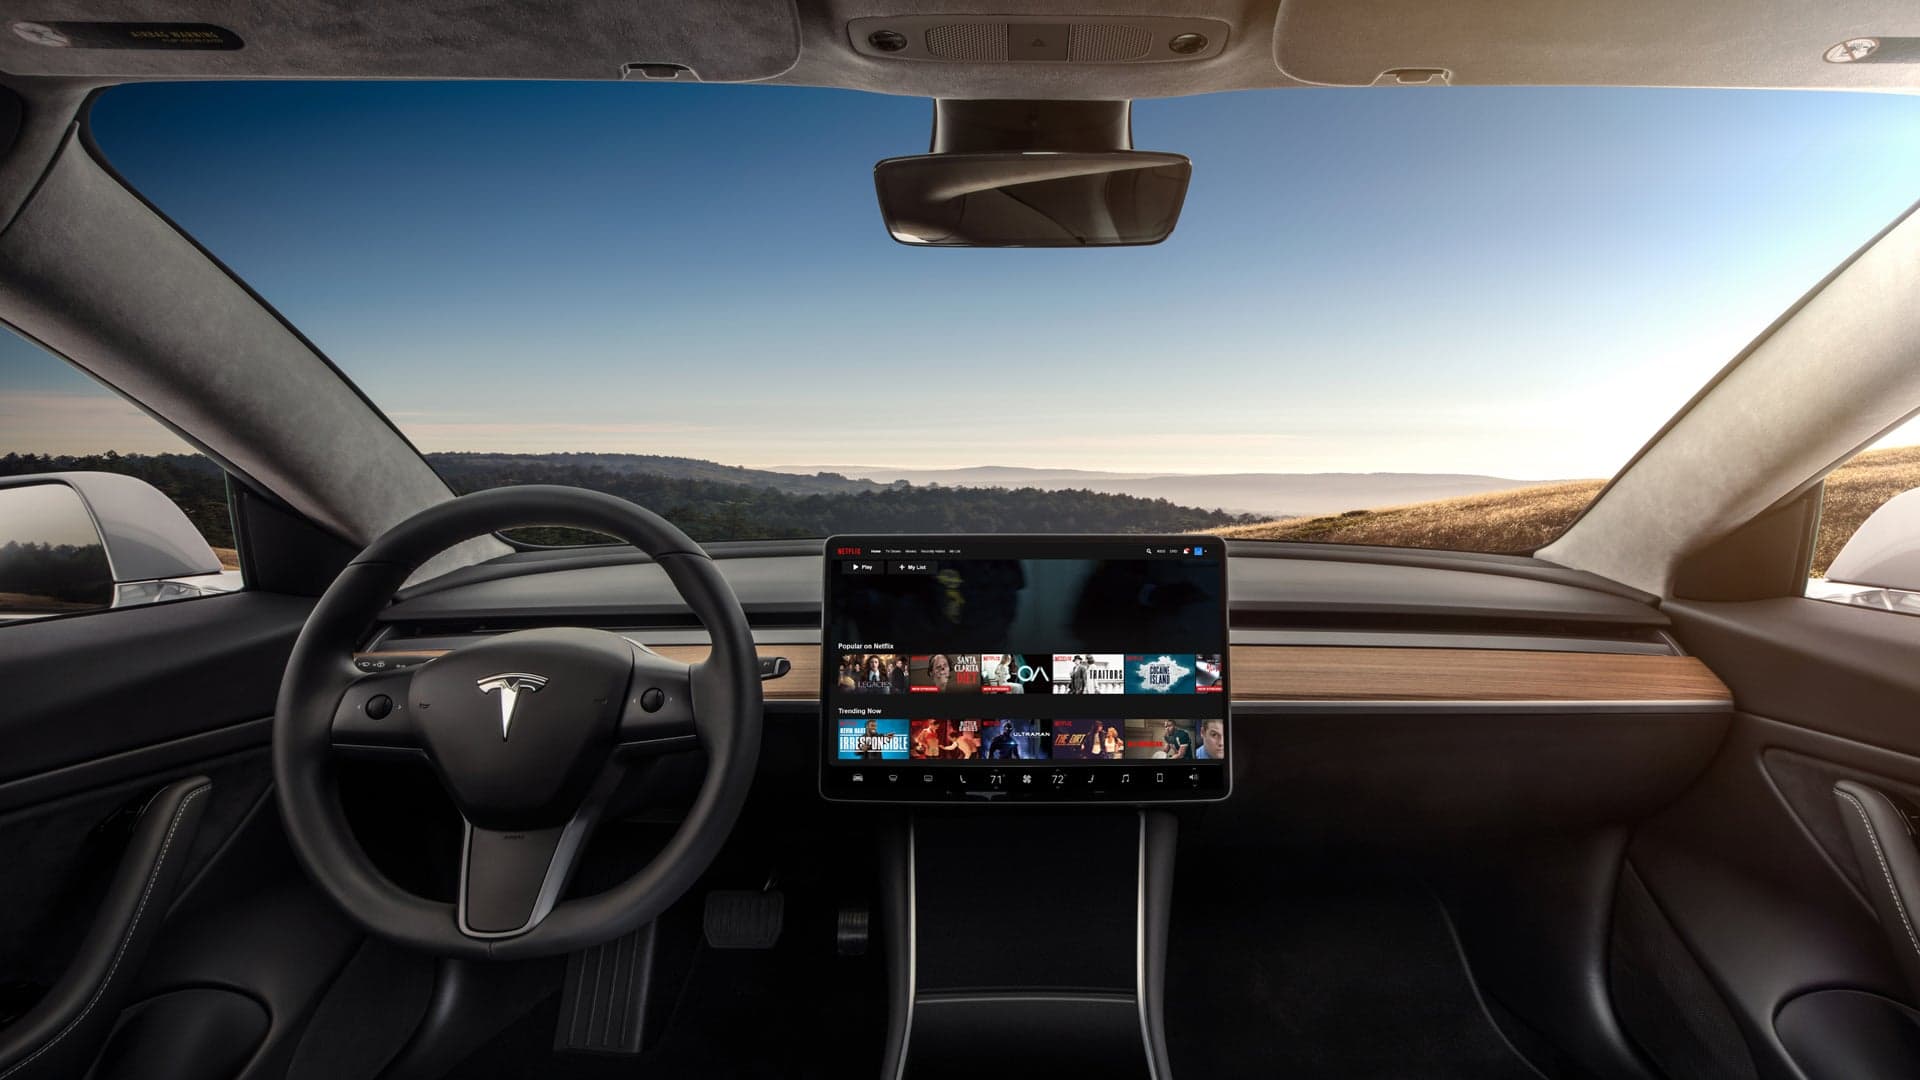 Tesla Vehicles Will Soon Stream Netflix and YouTube While Charging, Musk Tweets